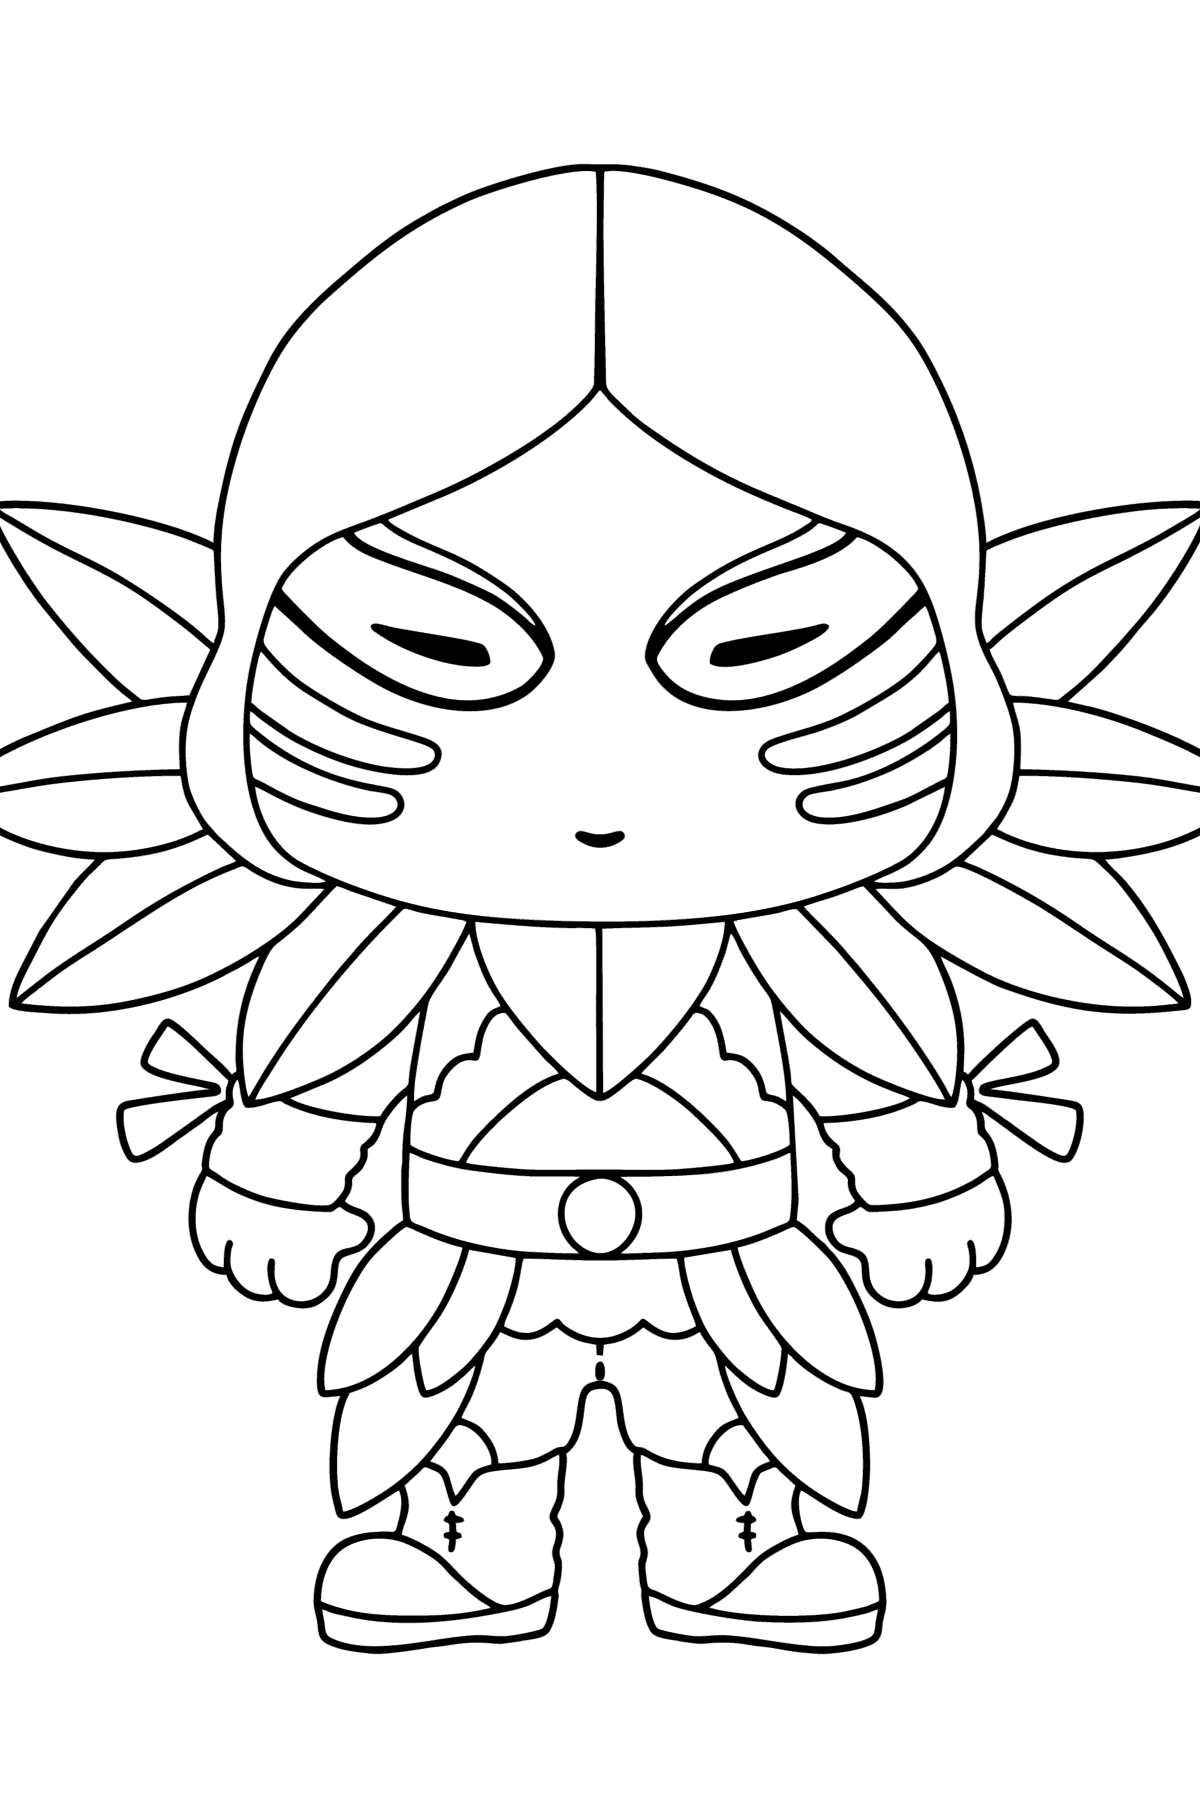 Fortnite Funko POP Raven coloring page - Coloring Pages for Kids